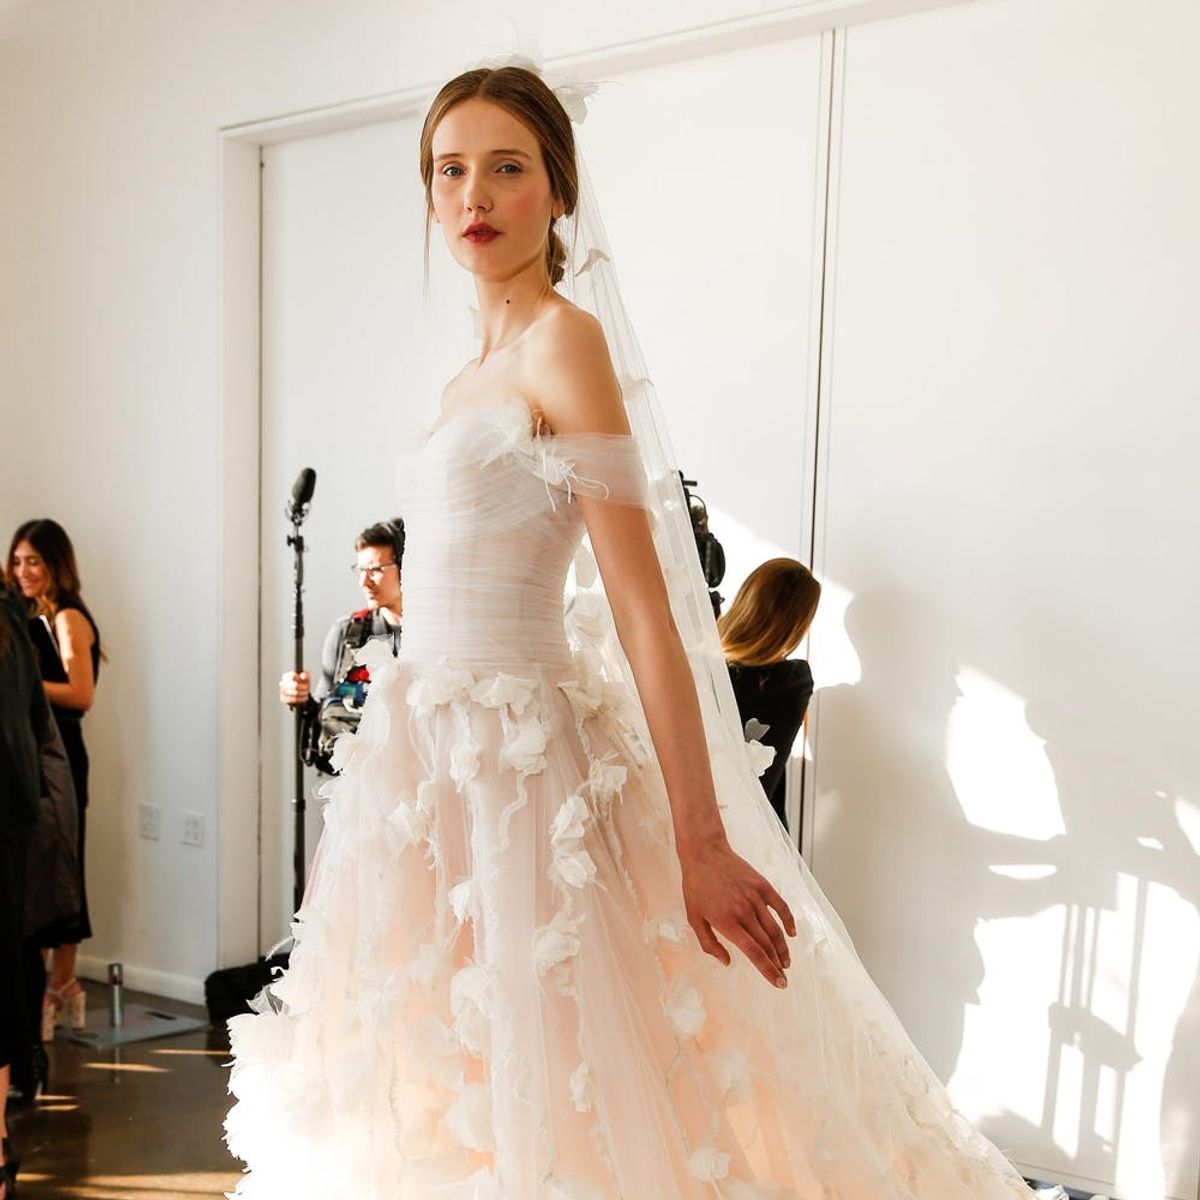 9 Wedding Dress Trends That Will Be Big in 2017